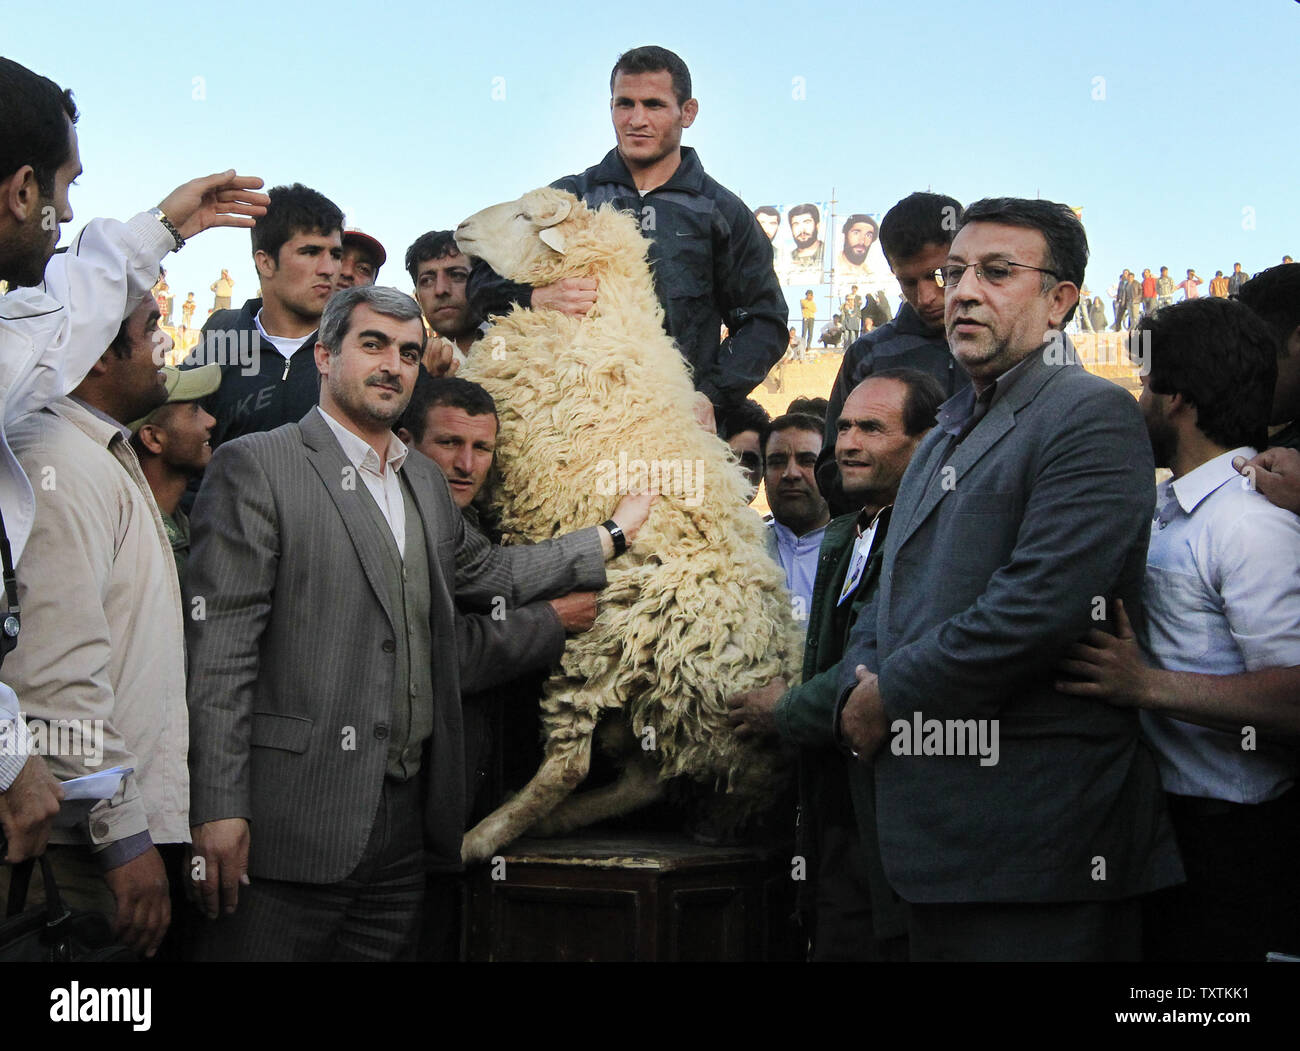 a-wrestler-holds-a-sheep-as-a-prize-after-winning-in-a-traditional-wrestling-tournament-called-bachokheh-in-esfarayen-iran-on-april-2-2012-bachokheh-traditionally-played-on-the-13th-and-14th-of-the-iranian-new-year-has-gained-popularity-in-recent-years-upimaryam-rahmanian-TXTKK1.jpg